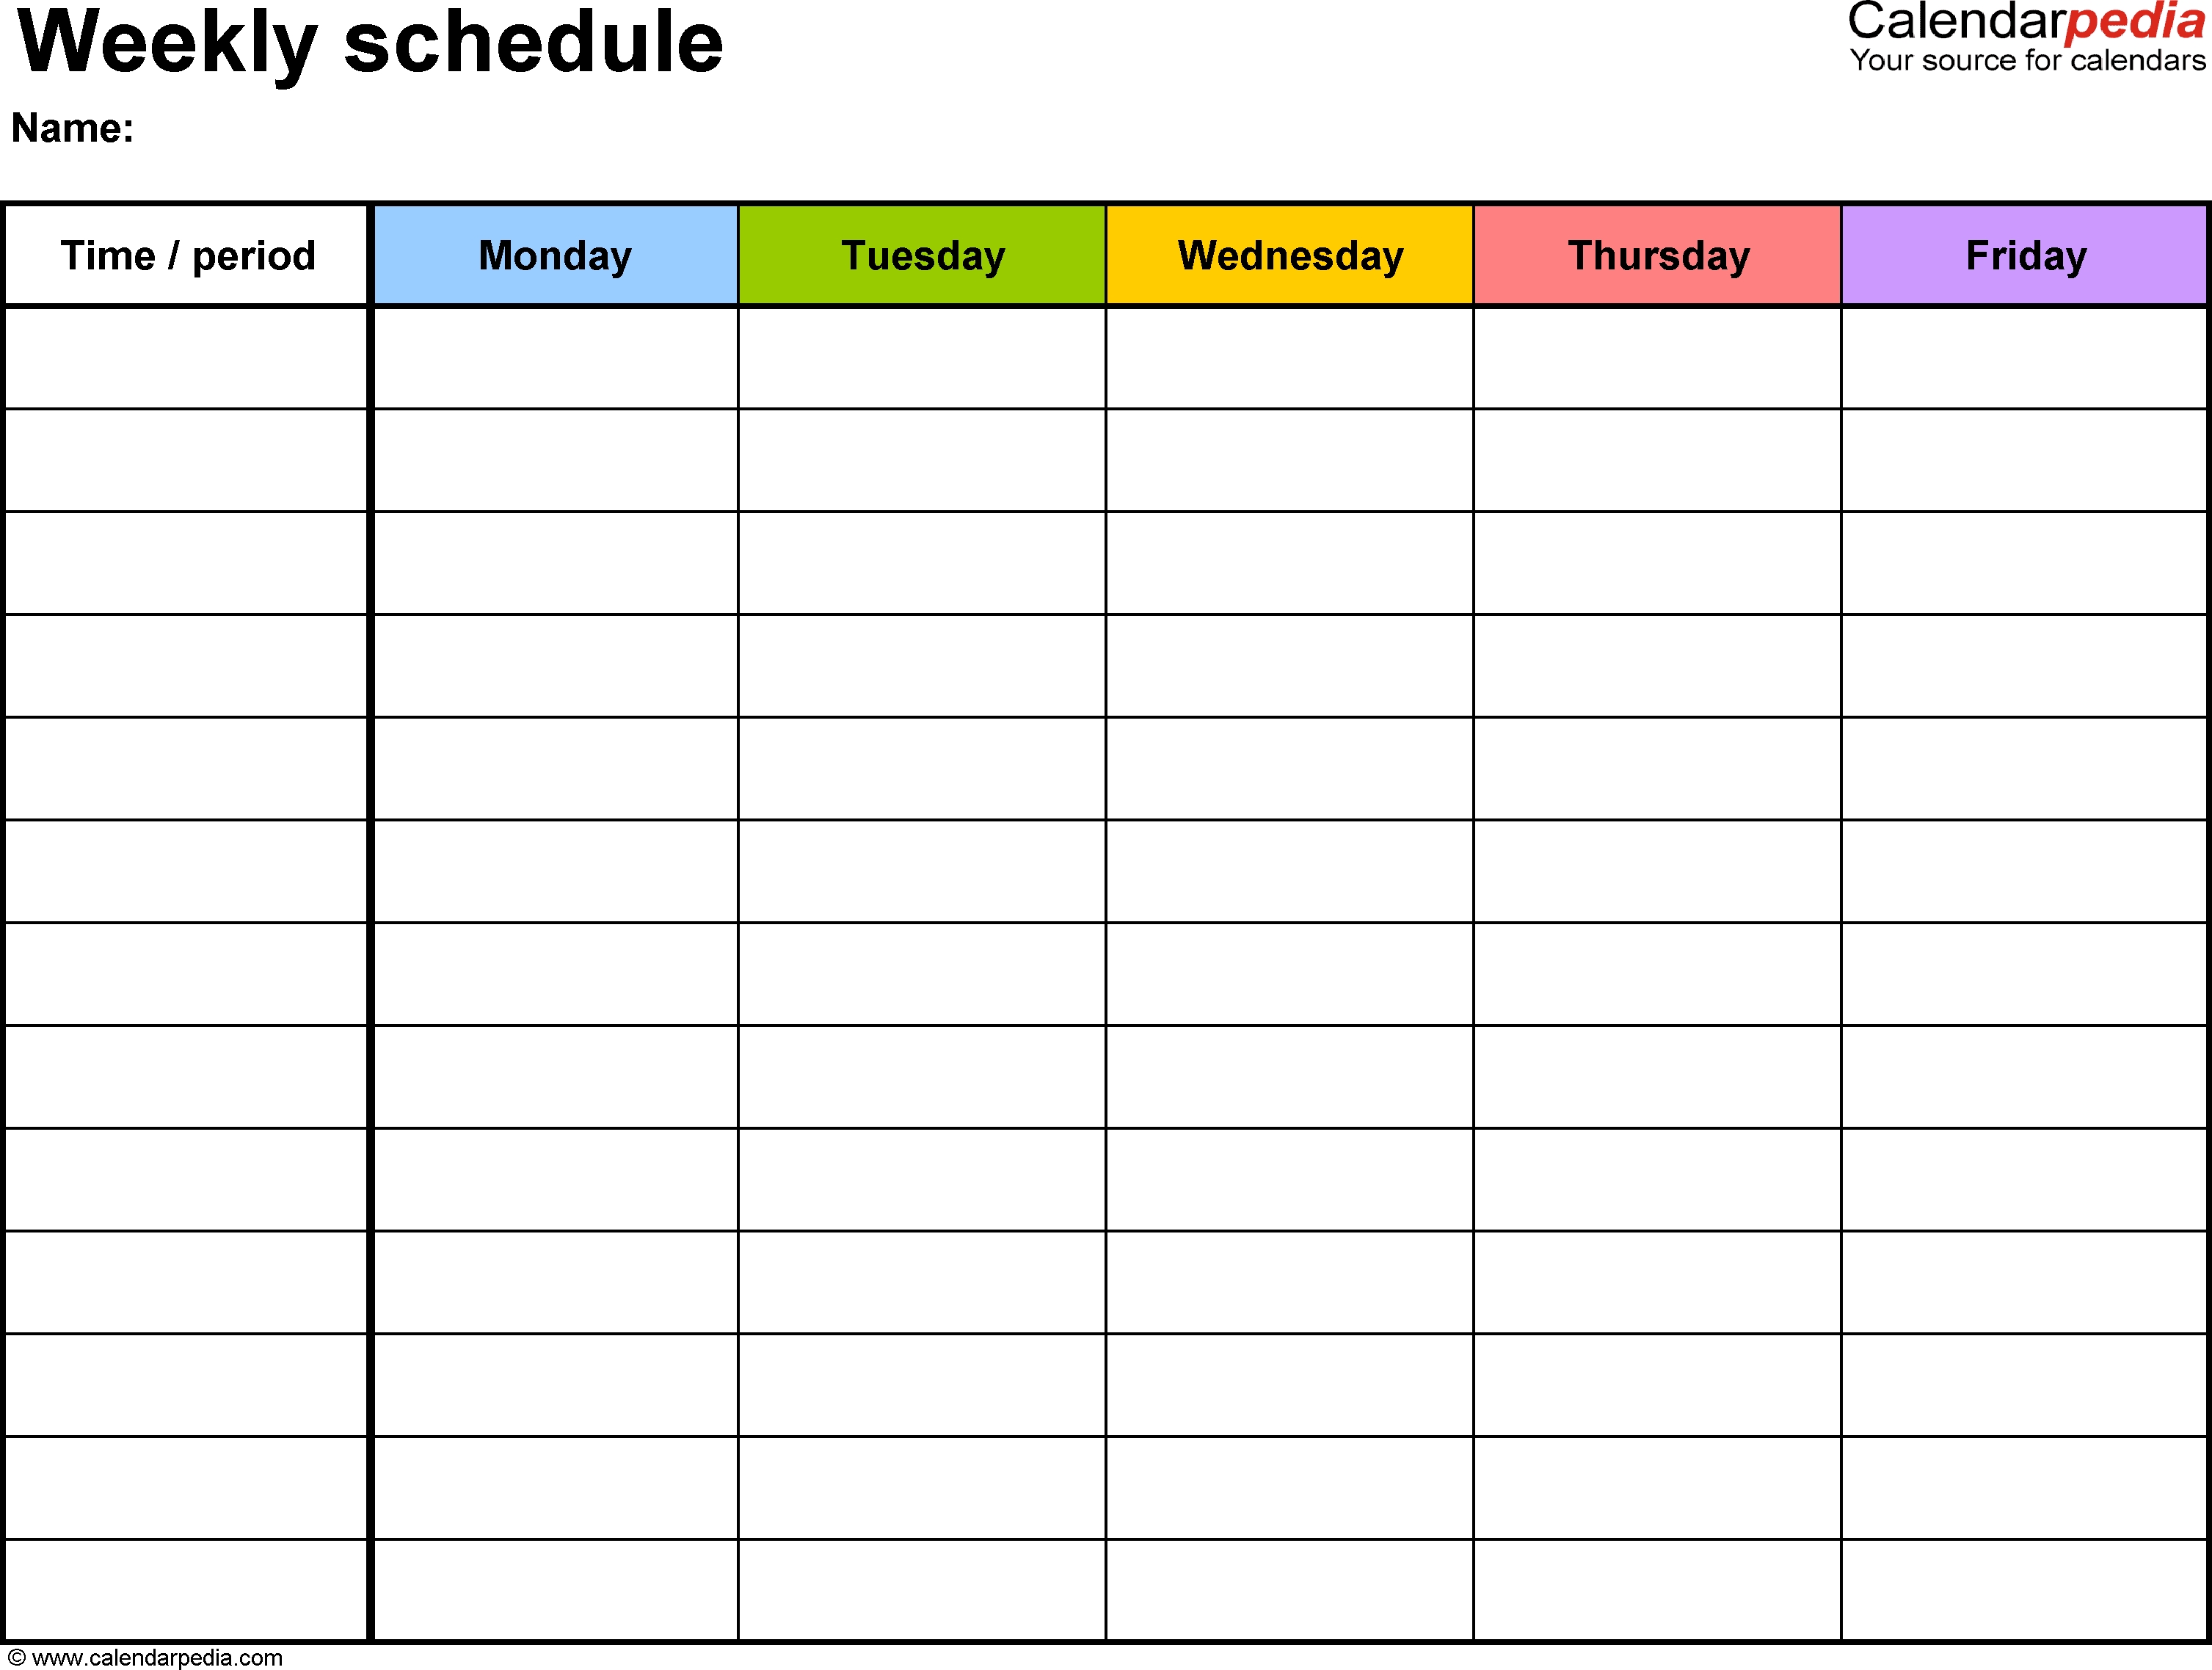 Free Weekly Schedule Templates For Word - 18 Templates throughout 7 Day Weekly Planner Template